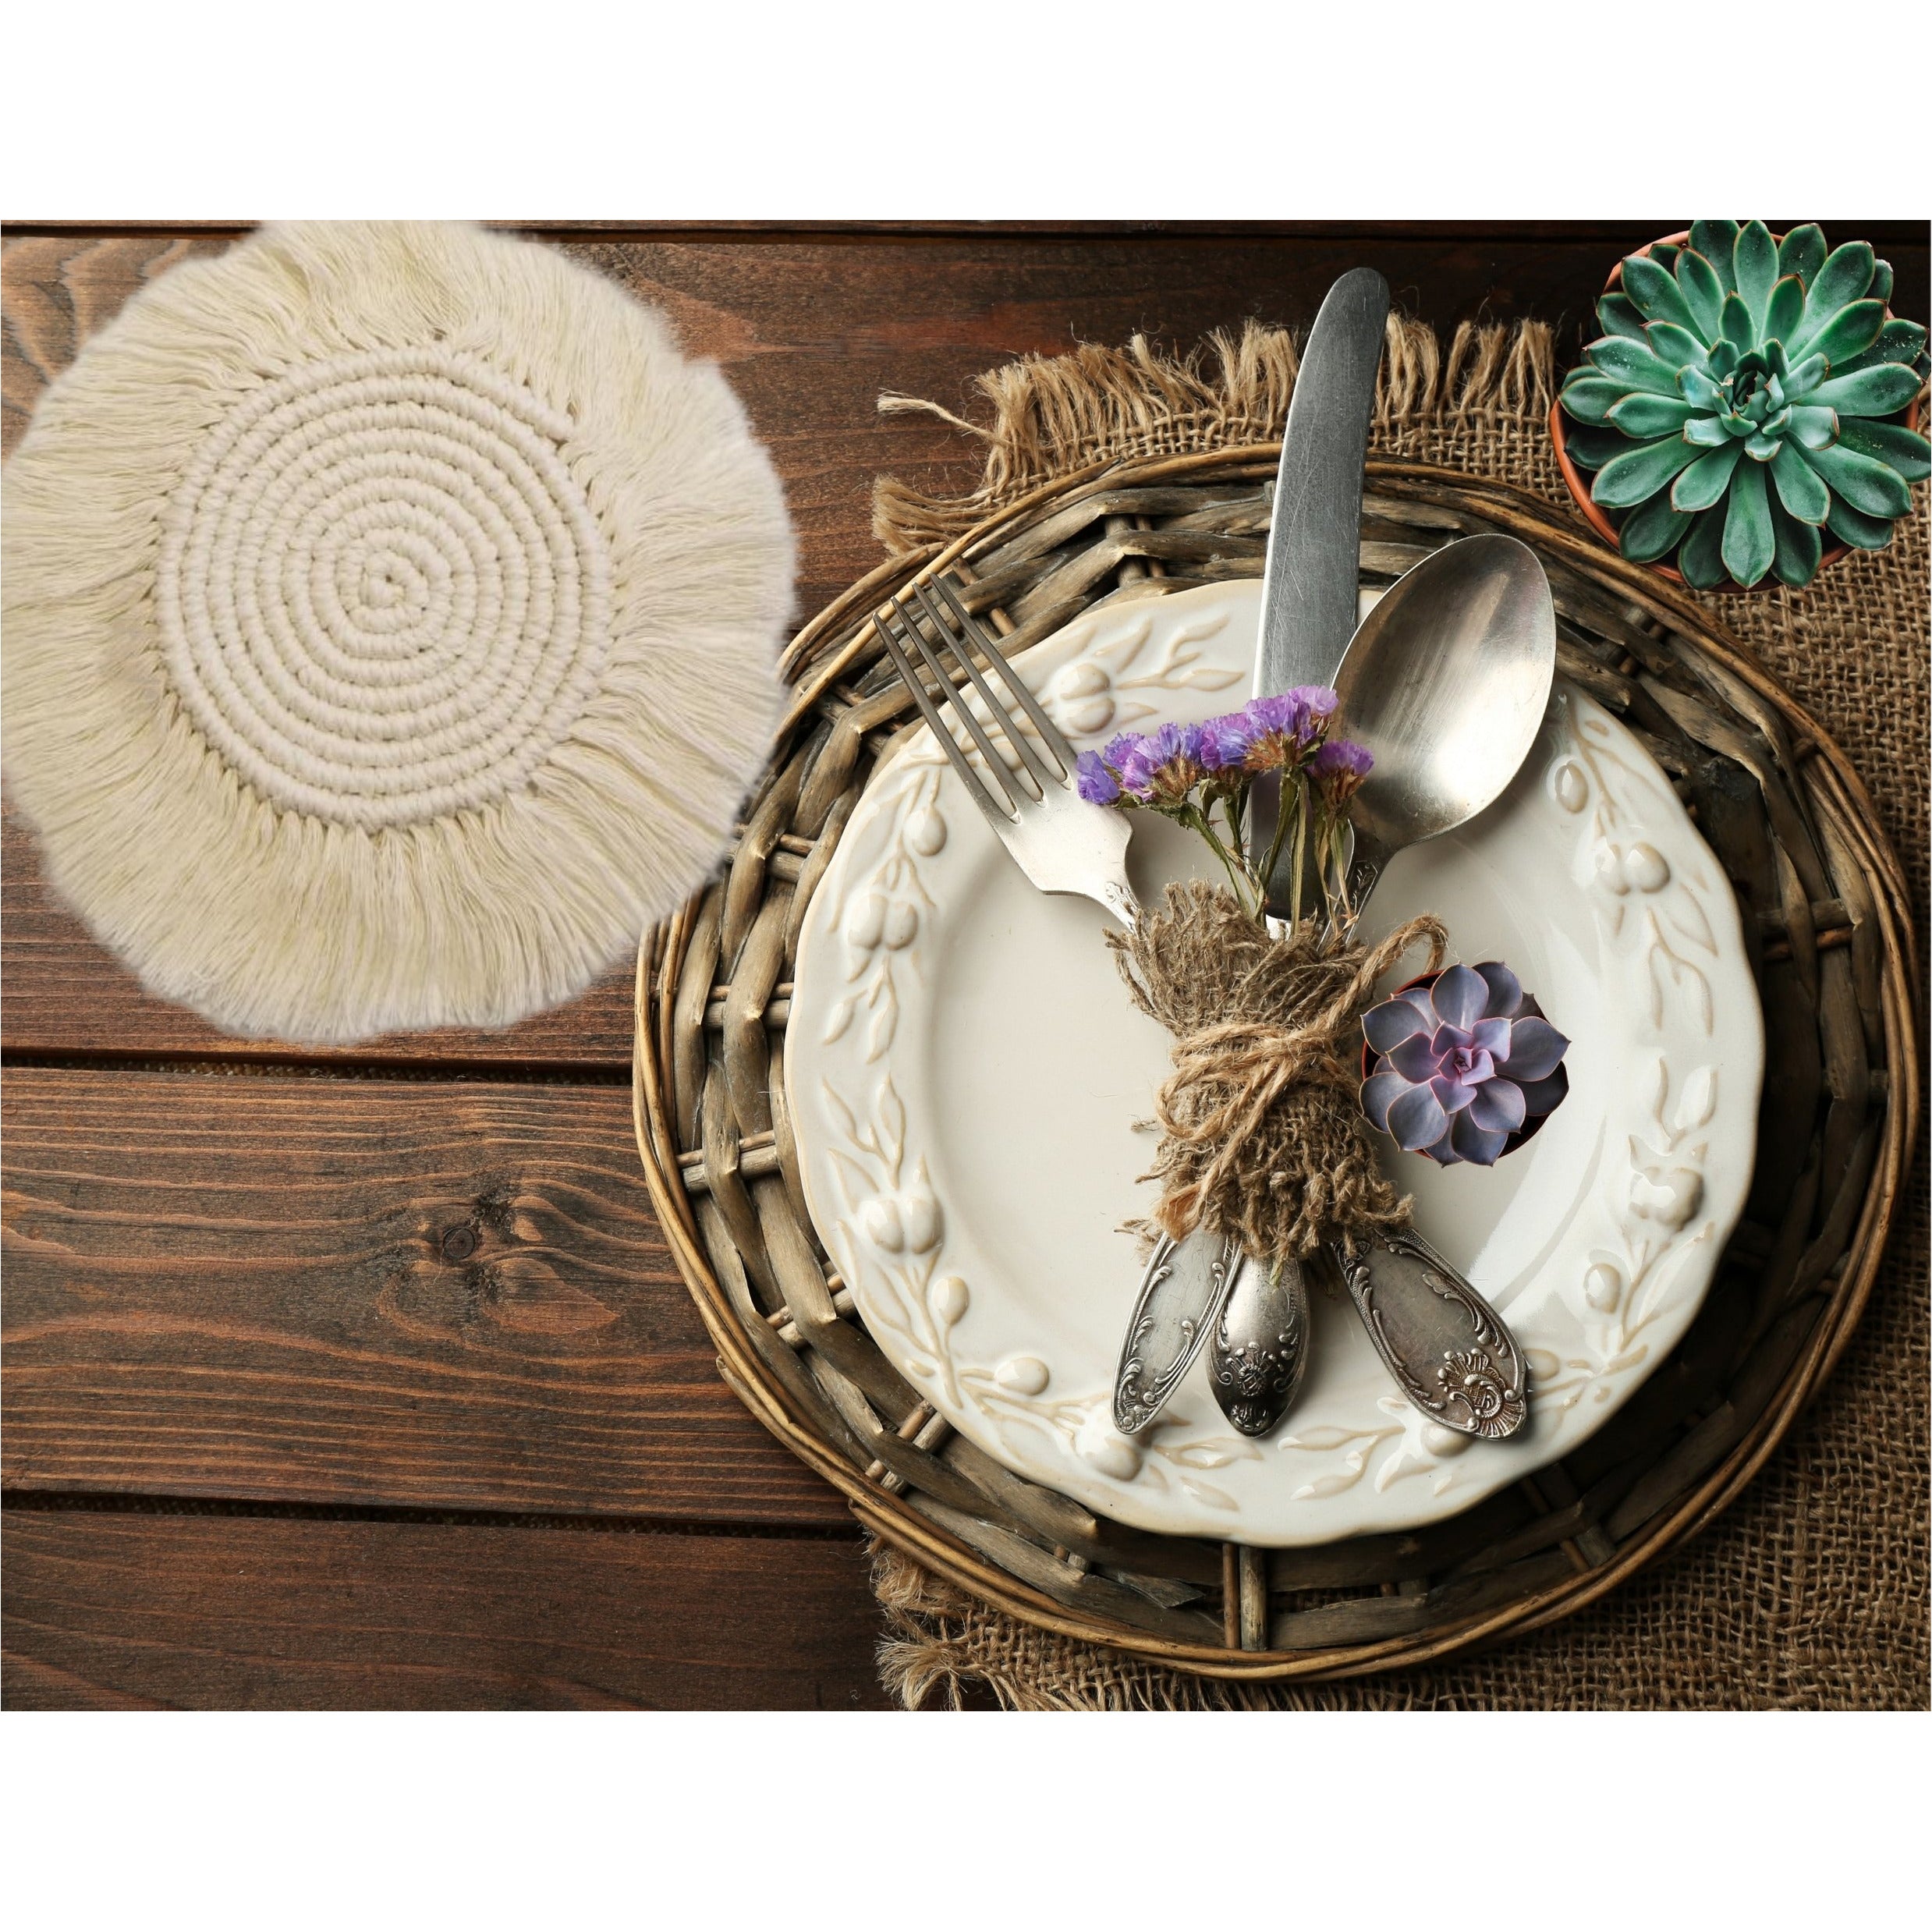 Set the tone outdoors as you layer an intimate table in the garden for friends this summer using our handmade macramé coasters for an effortless bohemian flair-Just add vibrant flowers, natural twigs, and summer textiles to complete the look. 